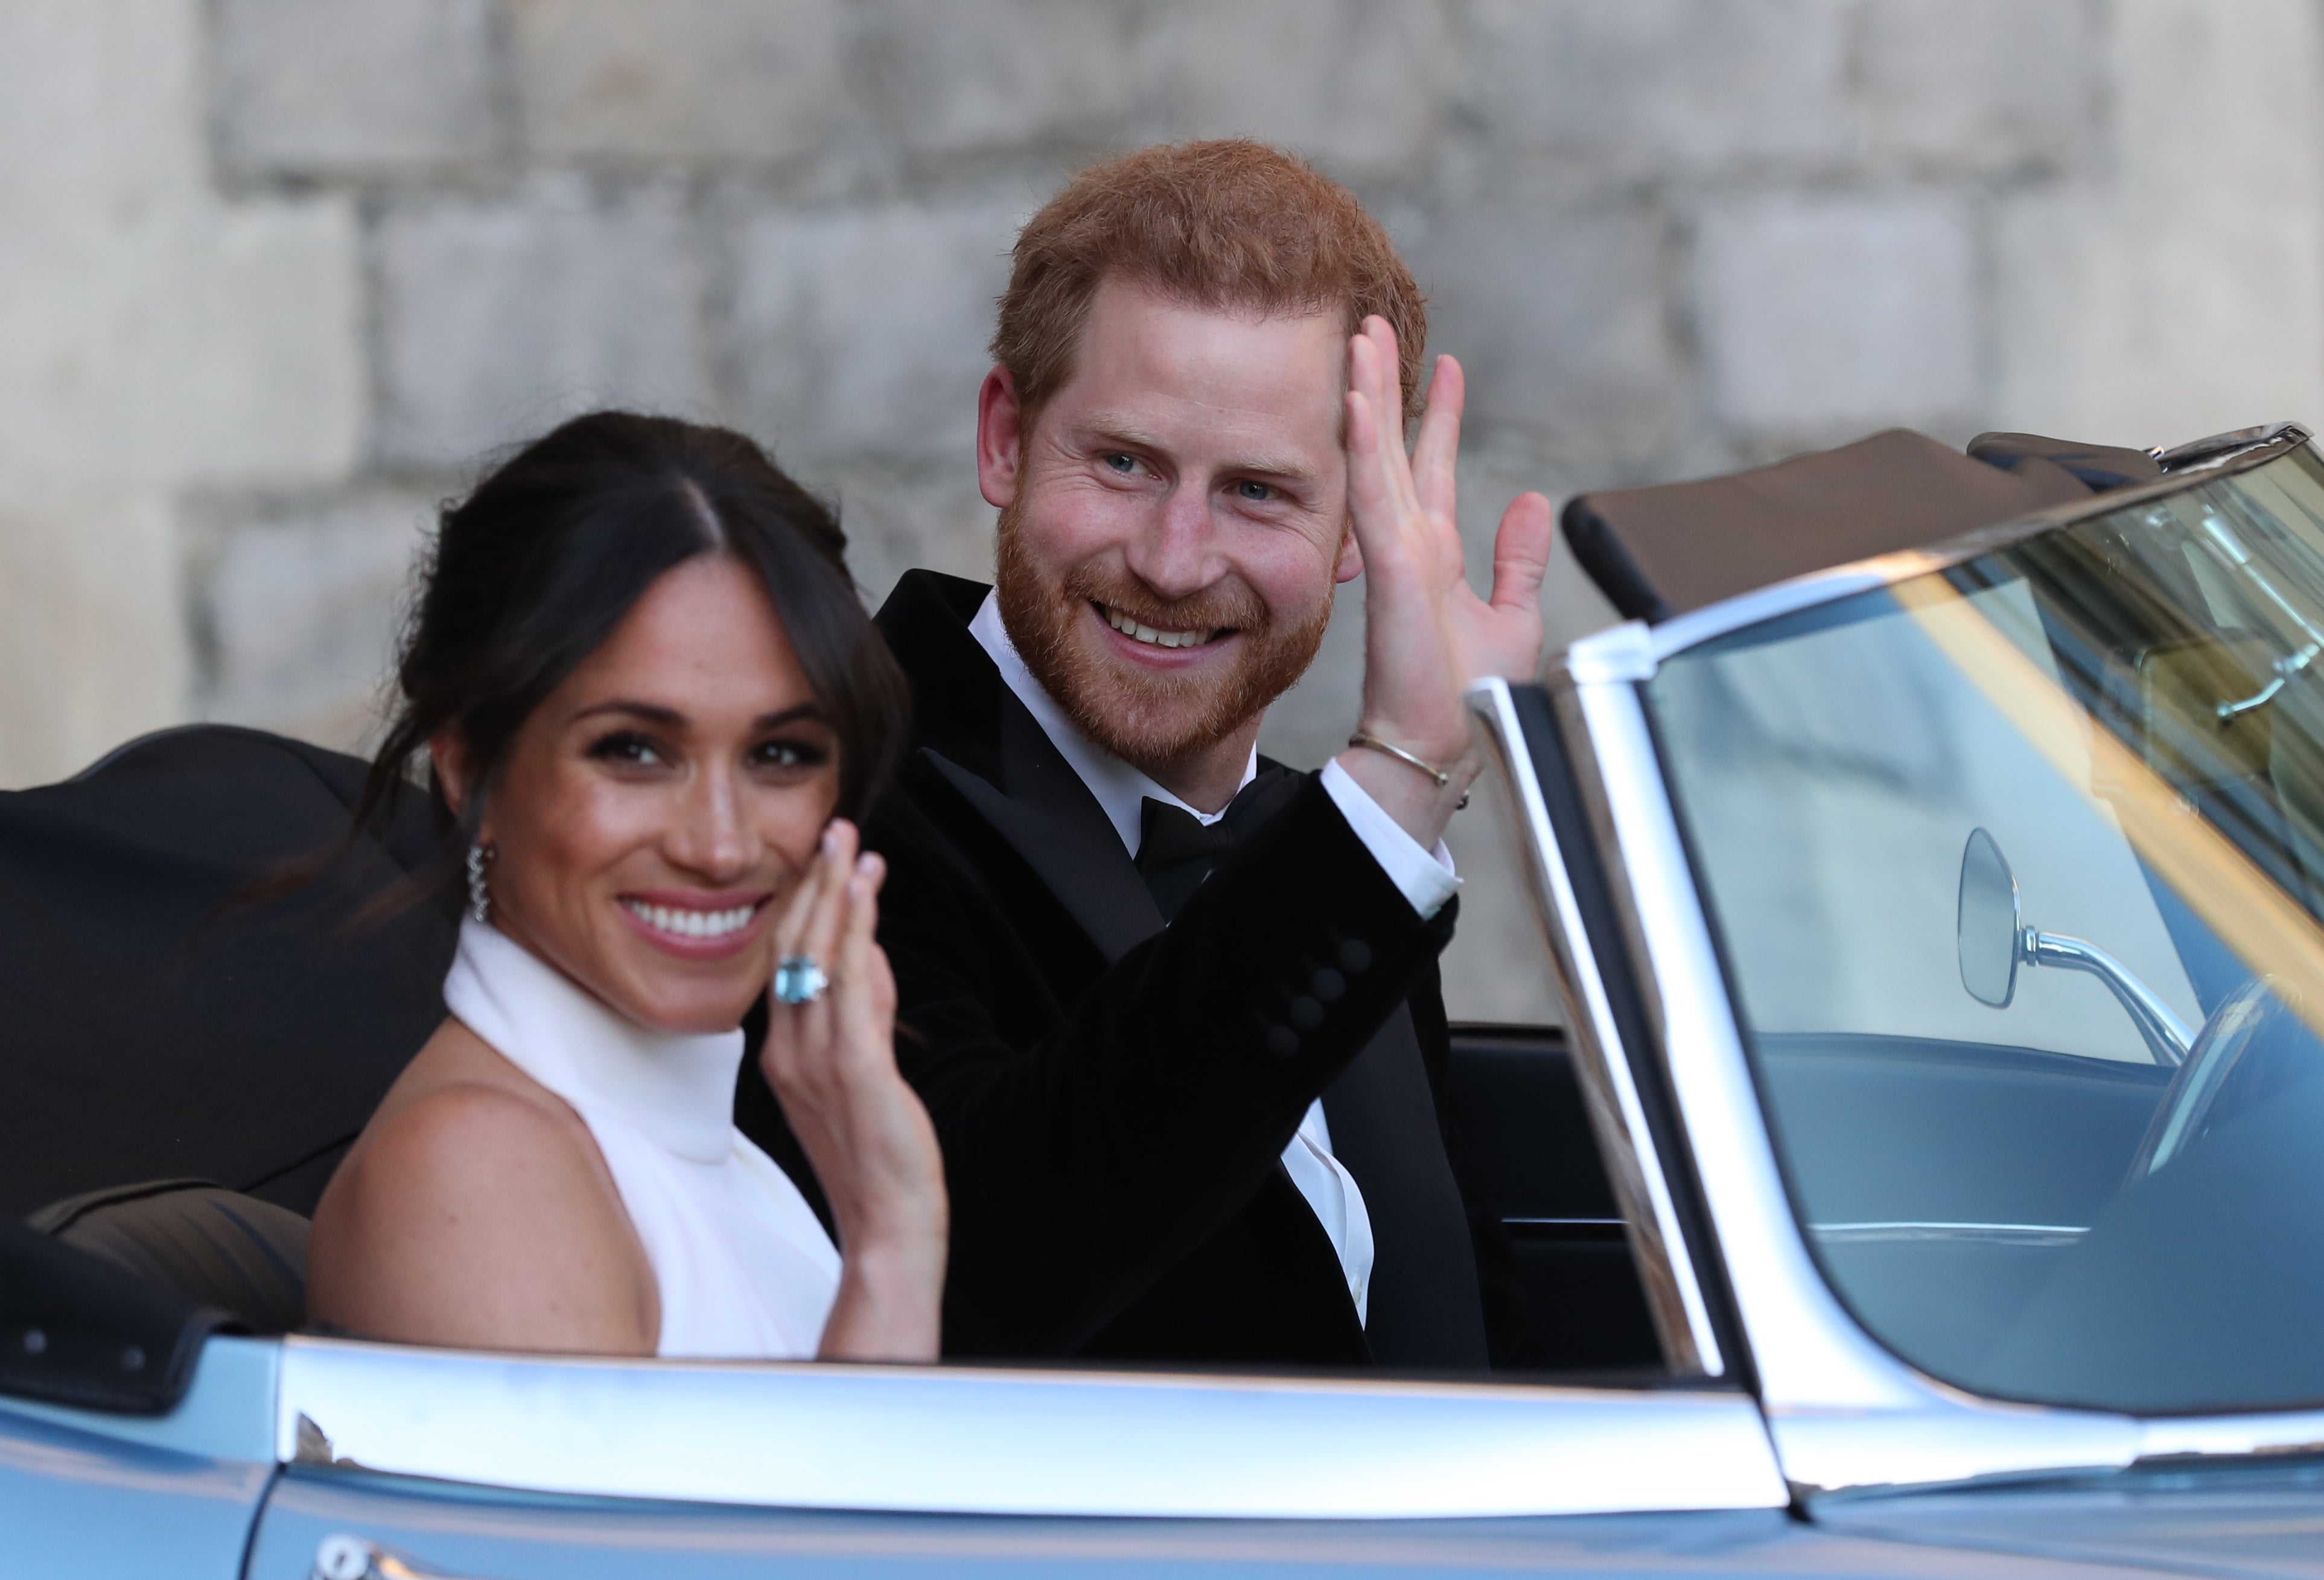 The court heard that Harry, pictured with wife Meghan, wants to return for a visit